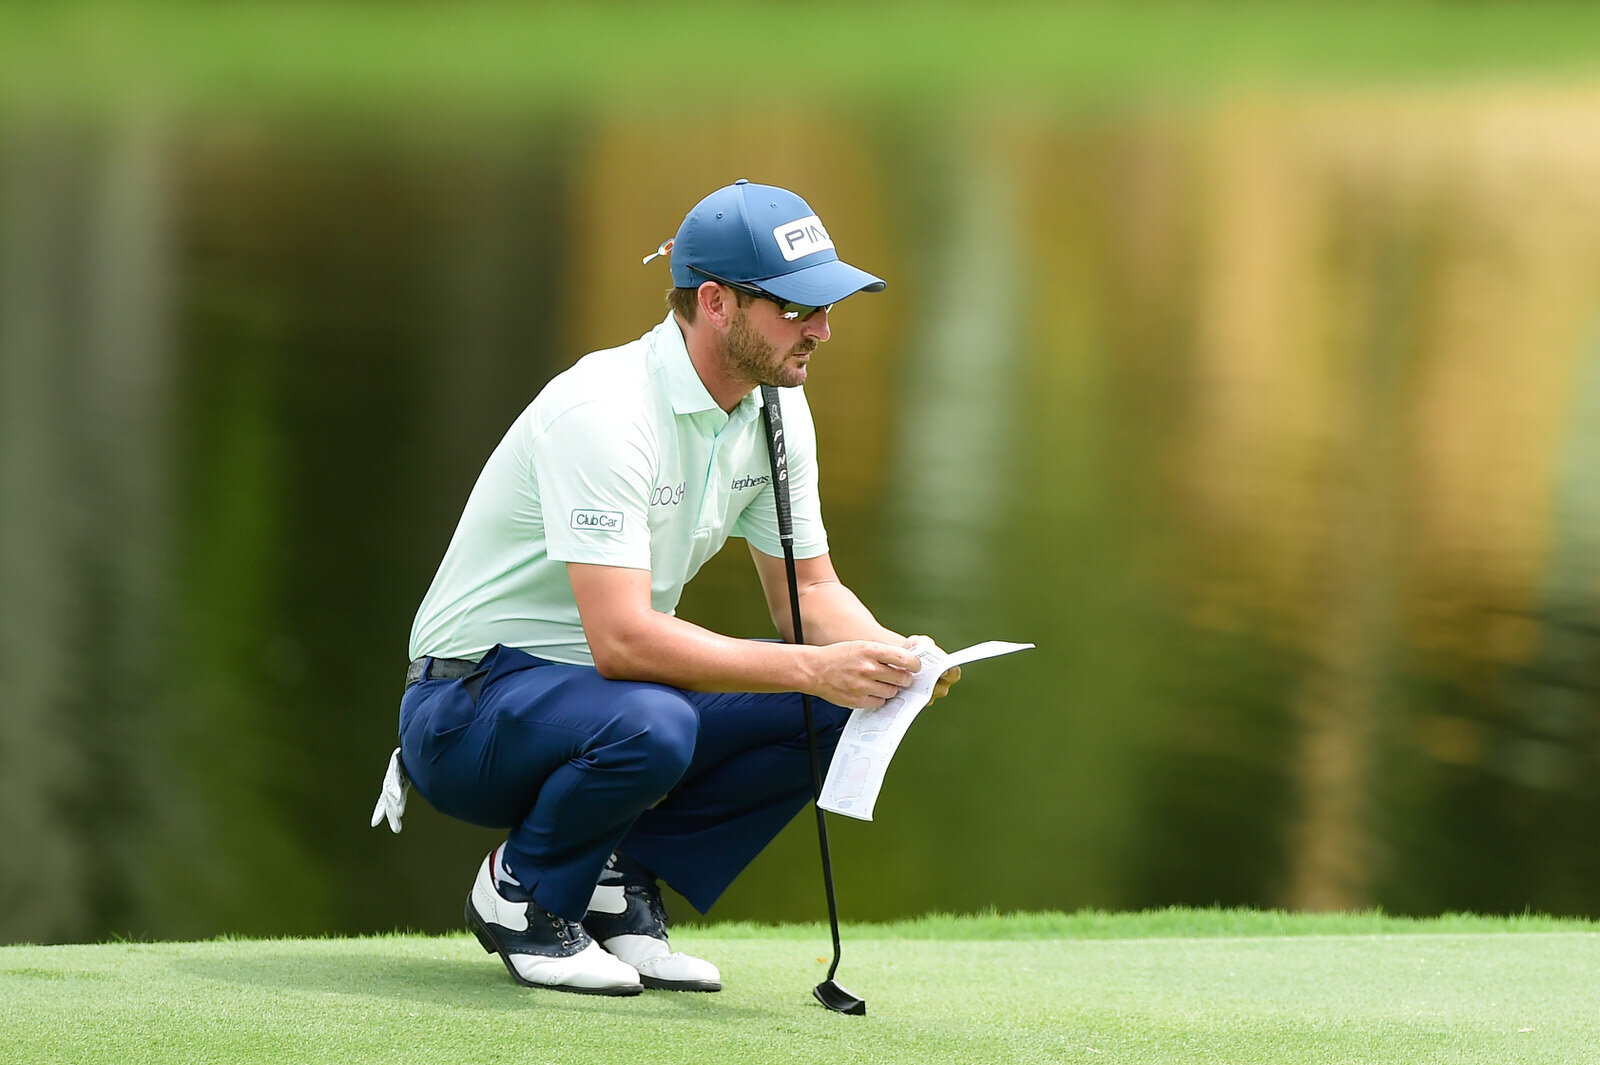  GREENSBORO, NORTH CAROLINA - AUGUST 14: Andrew Landry of the United States lines up a putt on the 15th green during the second round of the Wyndham Championship at  Sedgefield Country Club on August 14, 2020 in Greensboro, North Carolina. (Photo by 